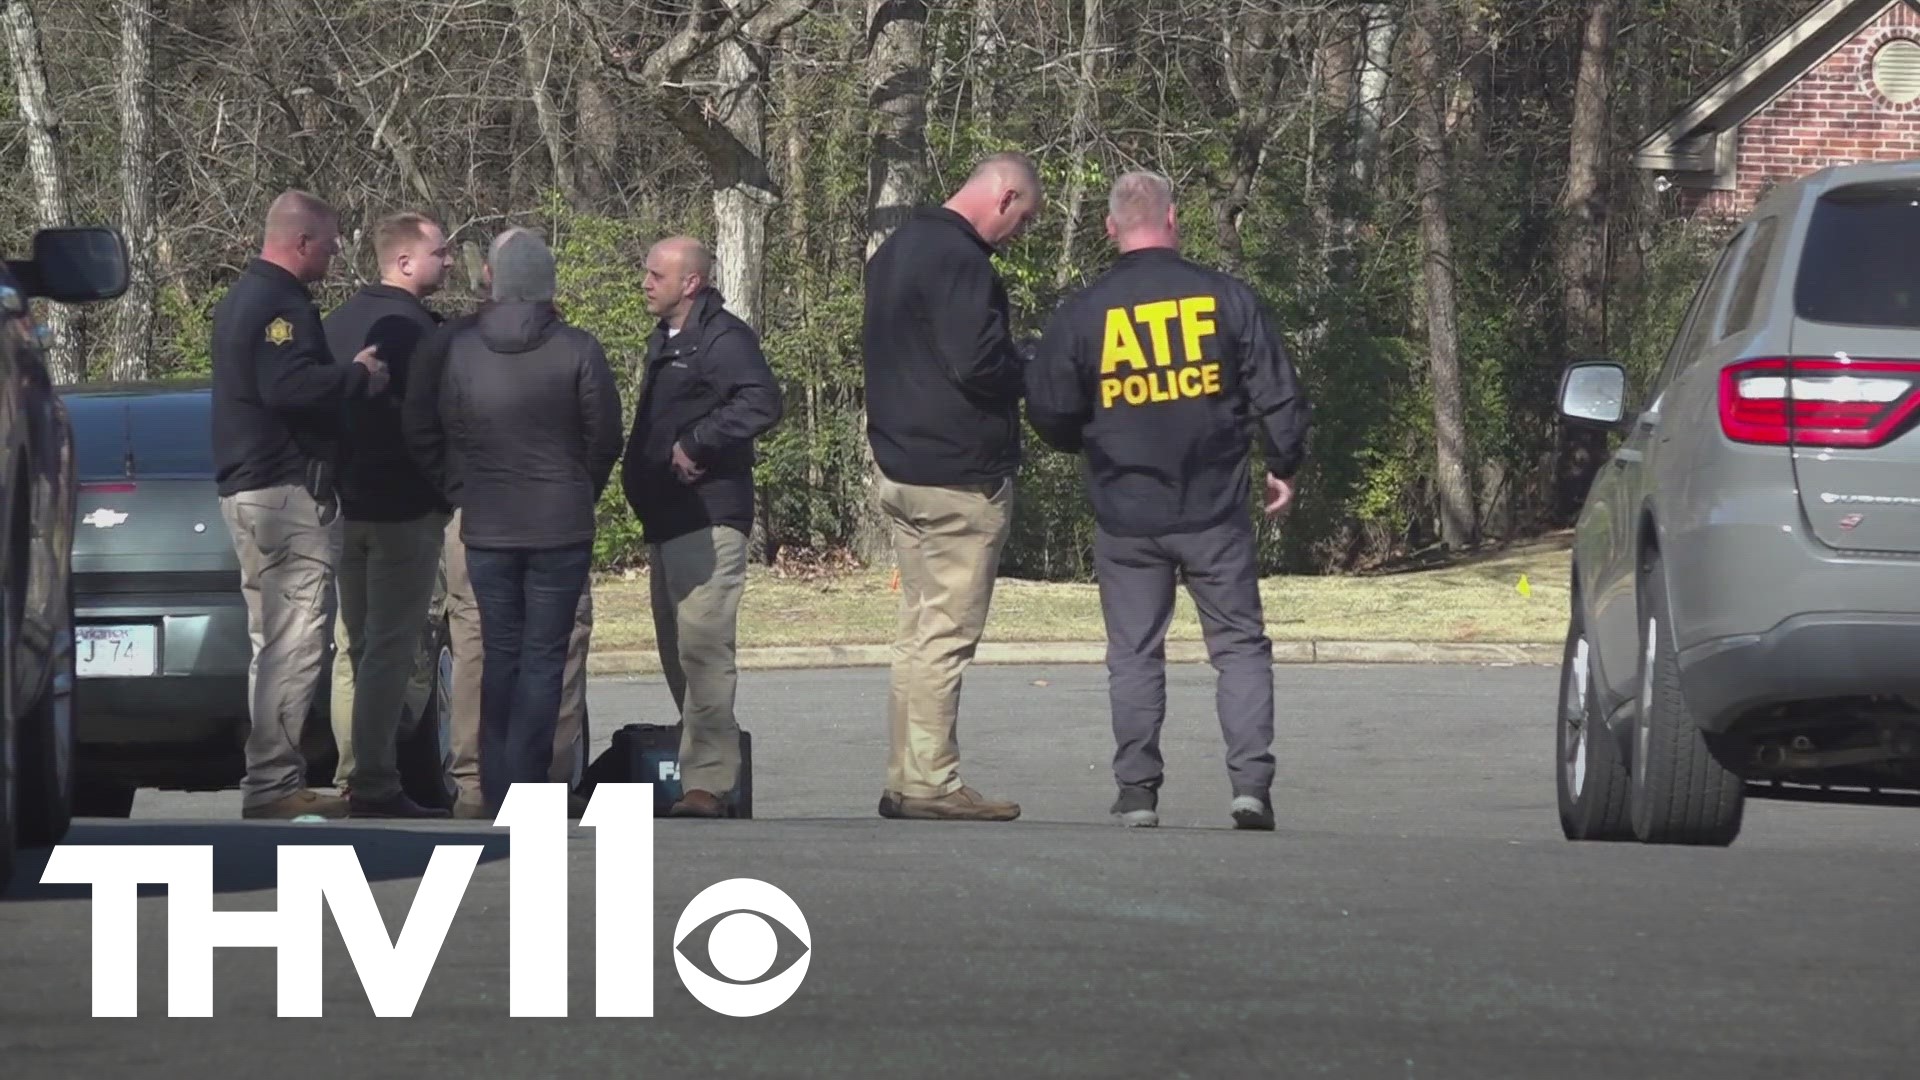 Some Arkansas leaders say the ATF needs to be fully transparent as questions continue to linger about why a federal judge issued the warrant.